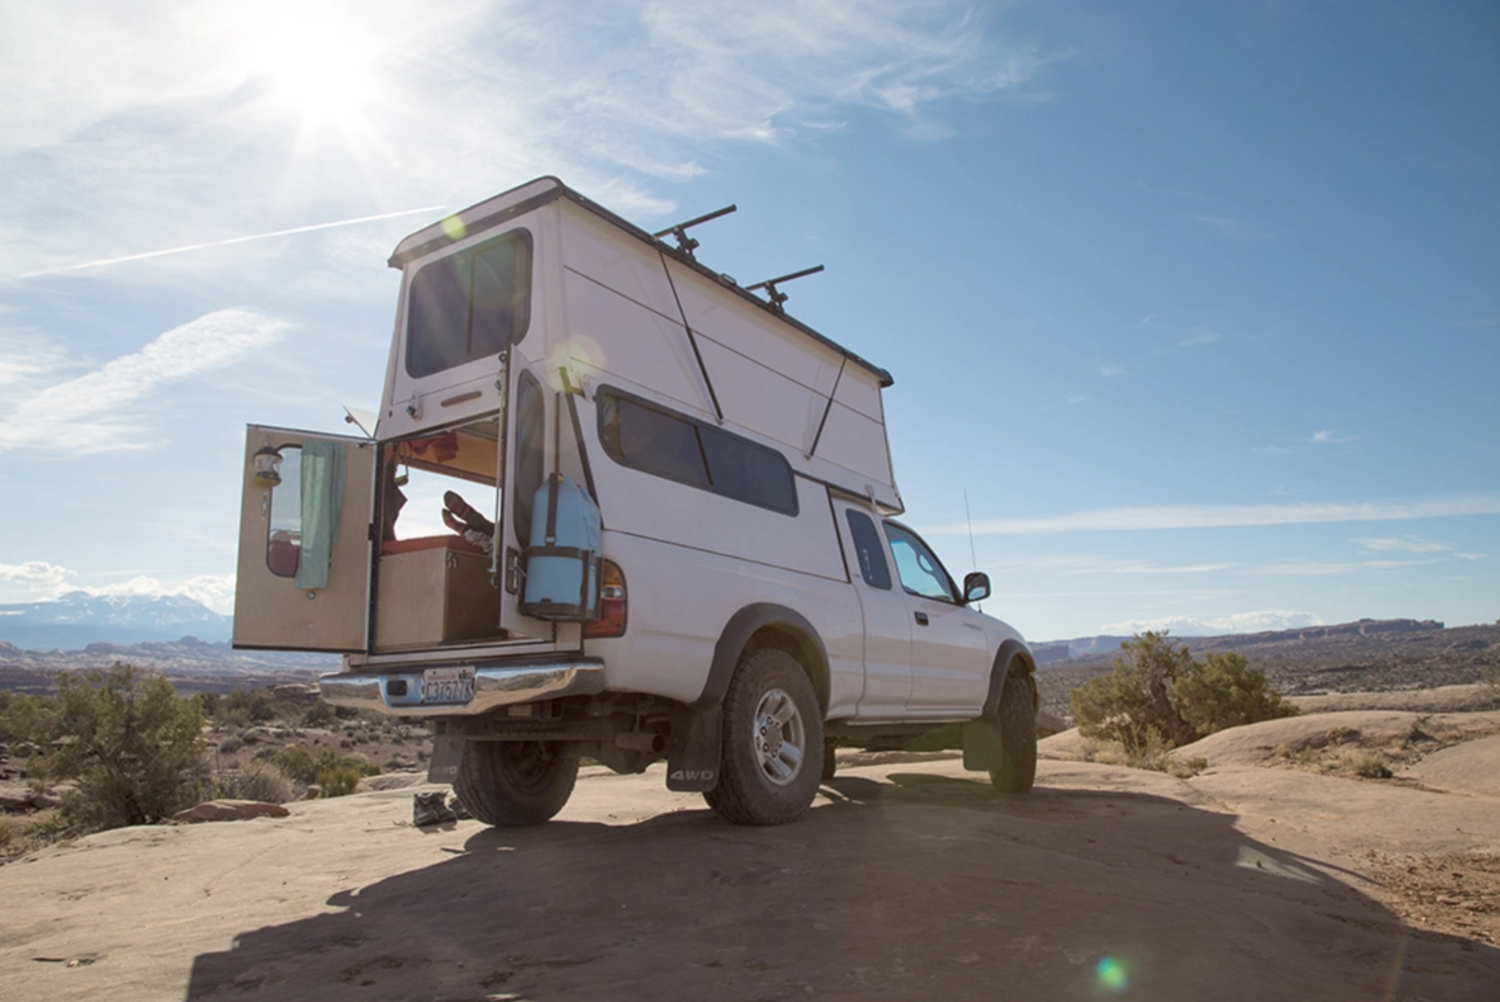 Build This Diy Truck Camper Overland Kitted